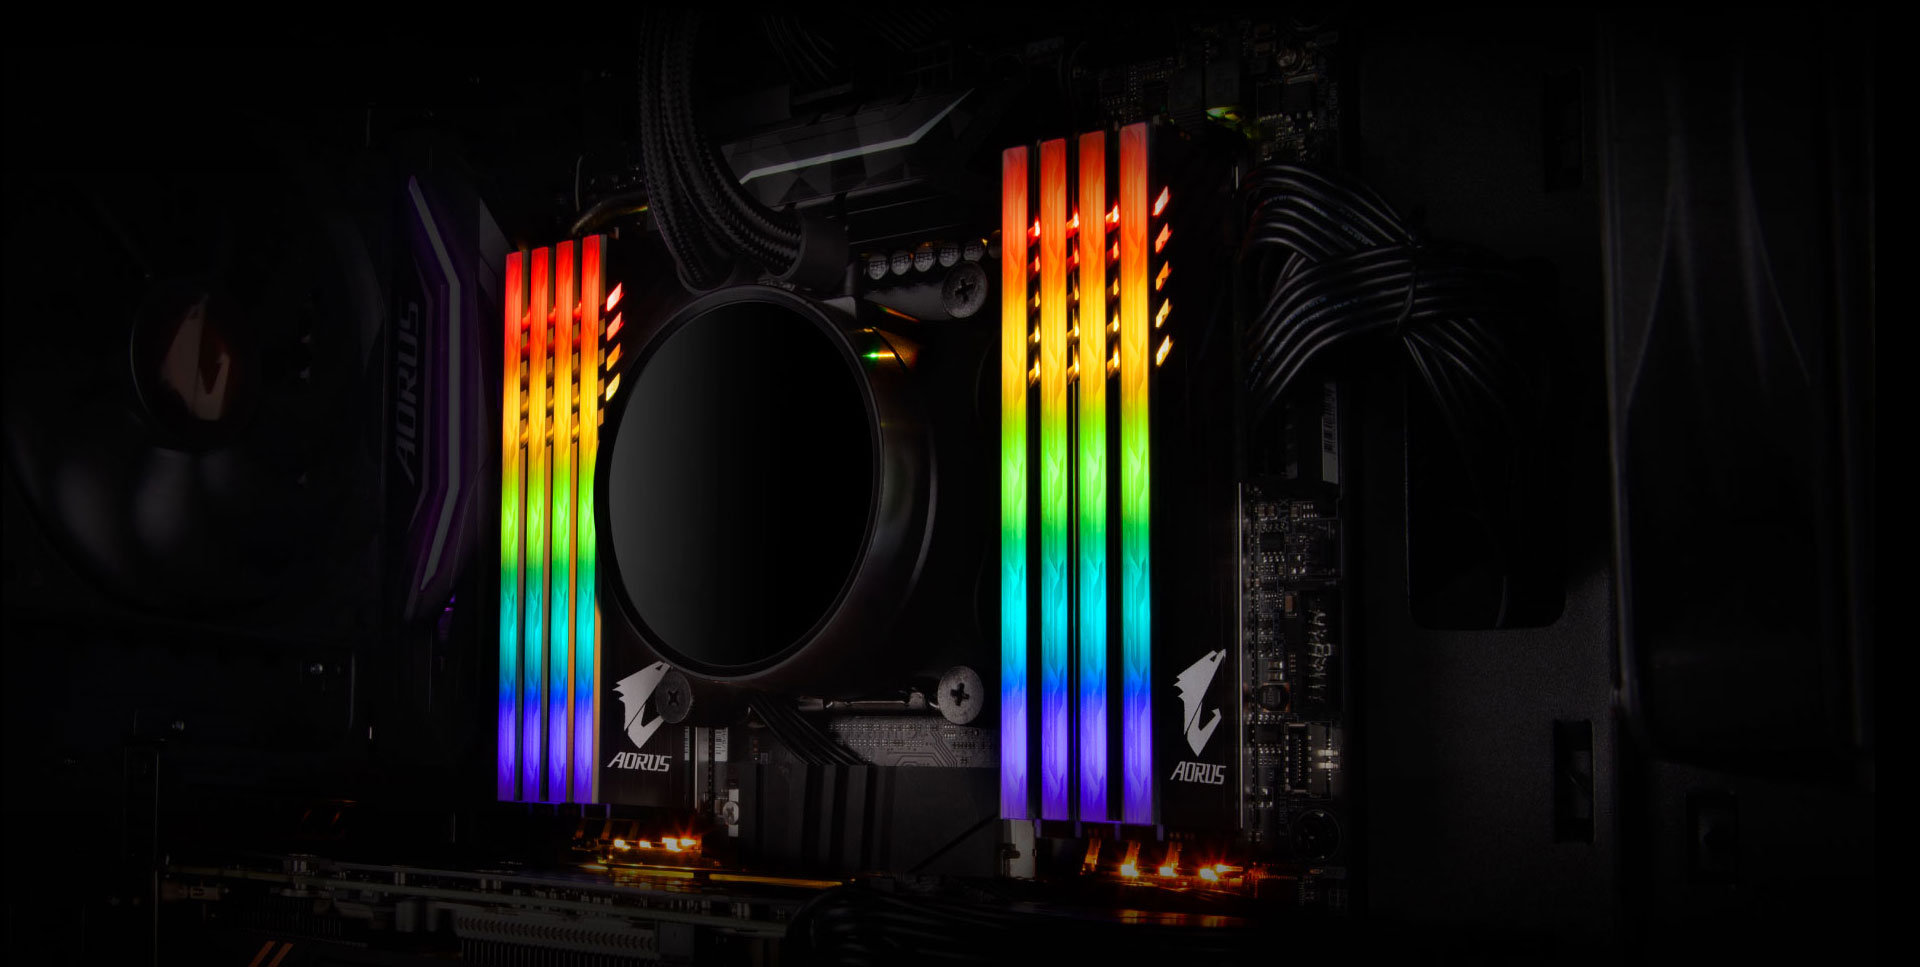 AORUS RGB Memory 16GB (2x8GB) 3200MHz (With Demo Kit)(Limited Edition) Key Features | - U.S.A.